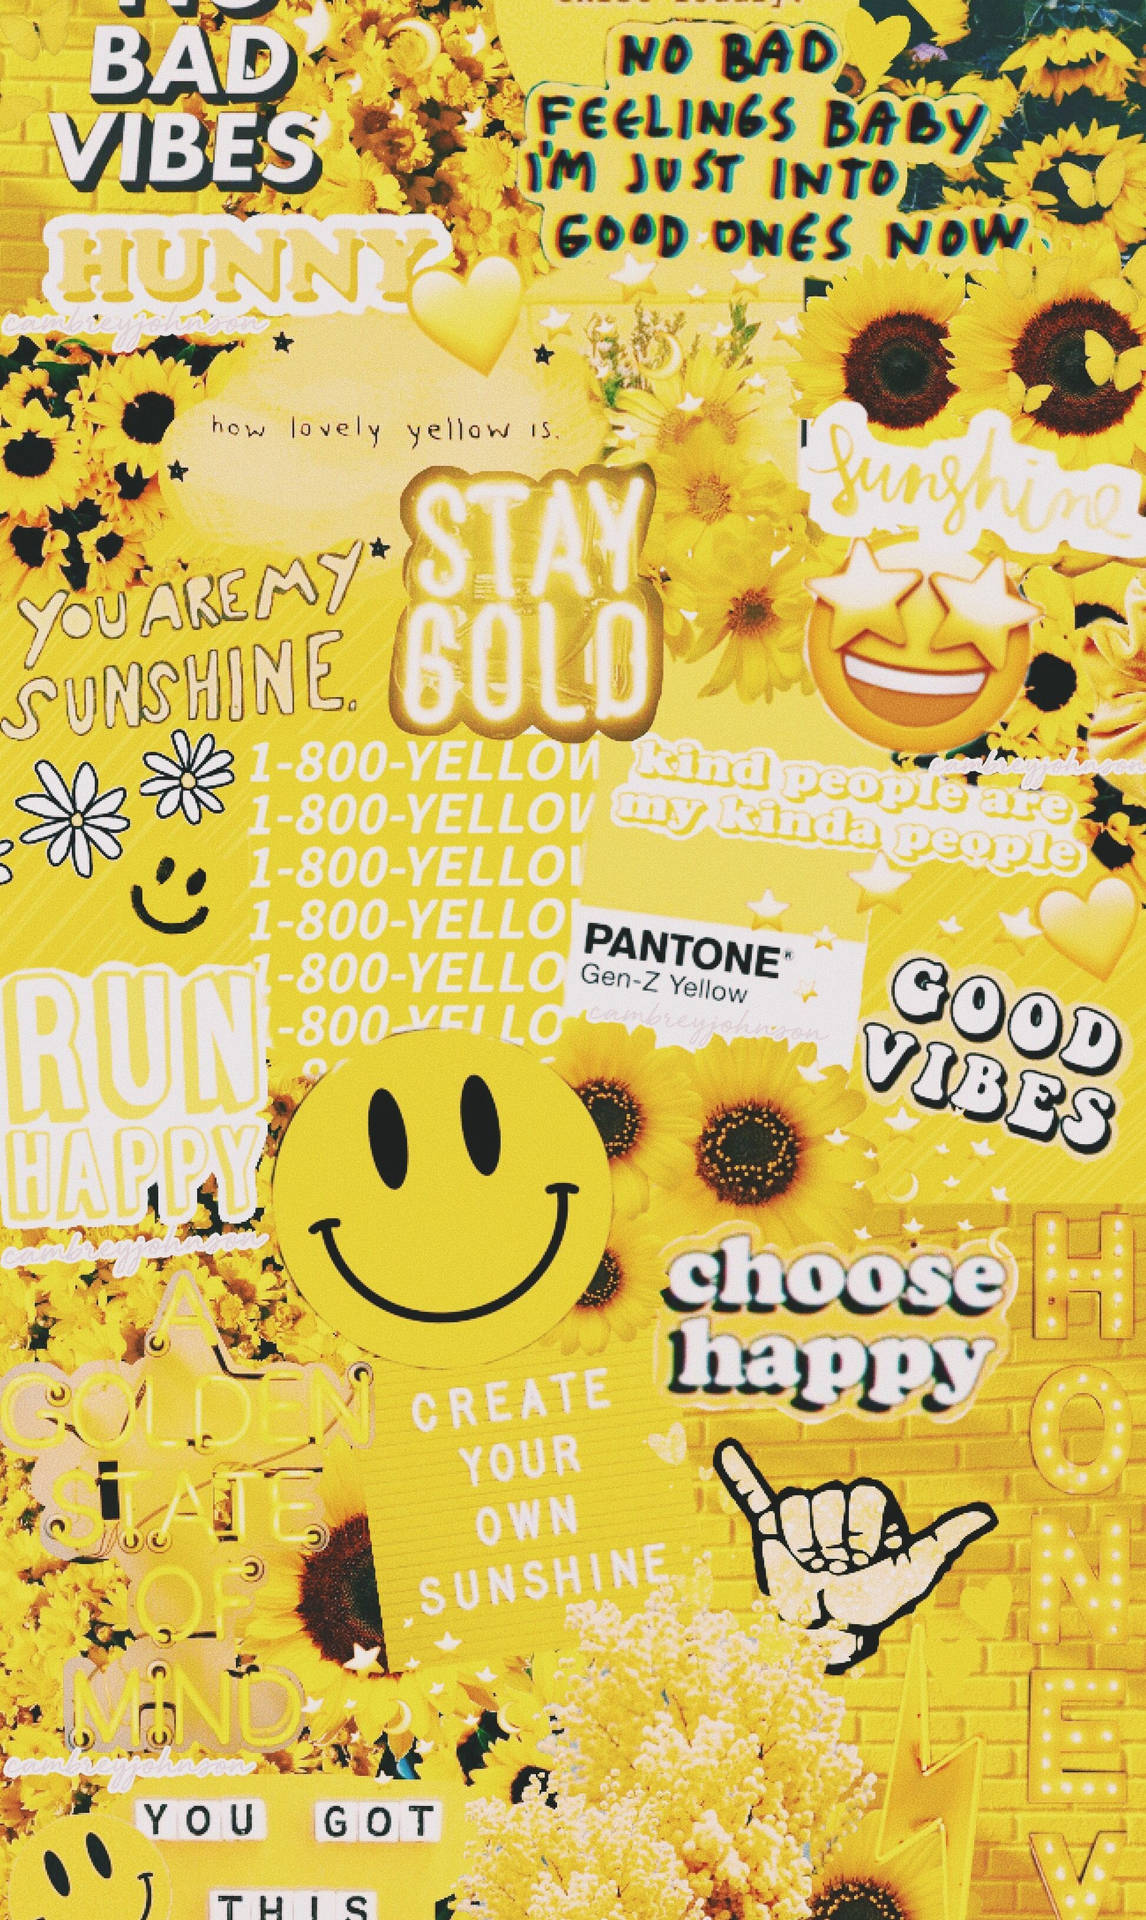 Brighten Up Your Day With This Fun and Cheerful Cute Yellow Aesthetic! Wallpaper